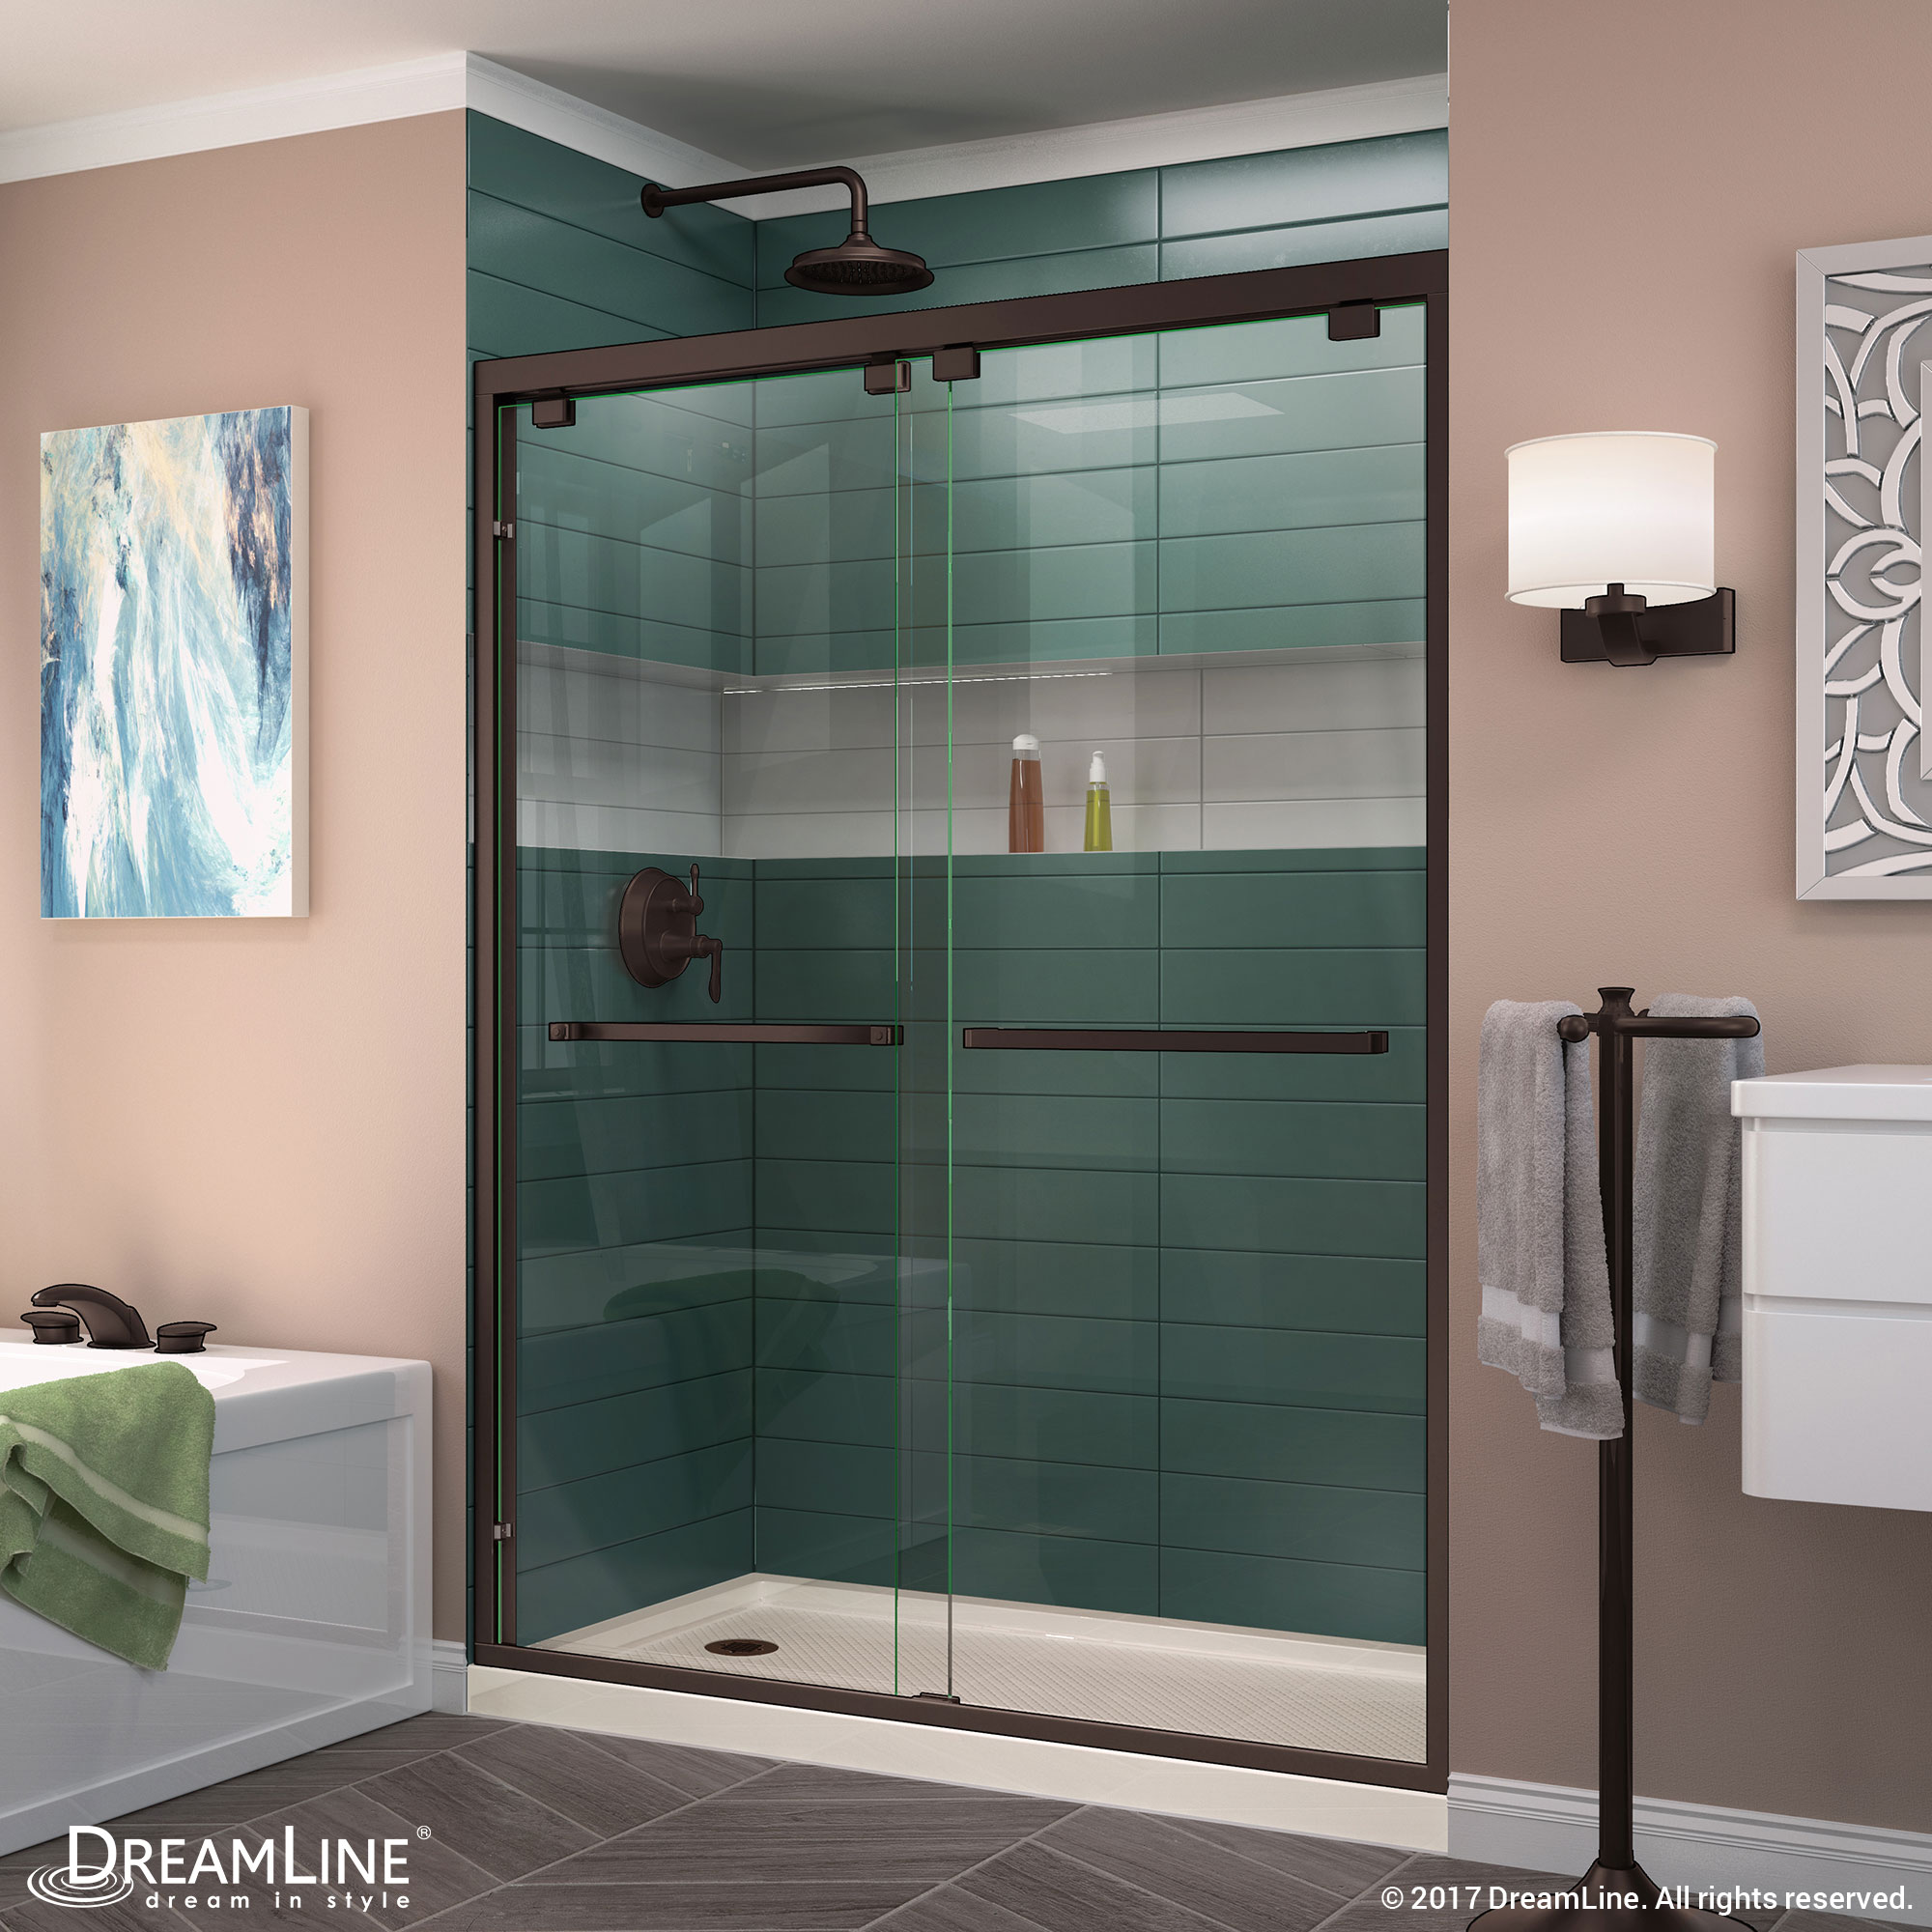 DreamLine Encore 34 in. D x 60 in. W x 78 3/4 in. H Bypass Shower Door in Brushed Nickel and Left Drain Biscuit Base Kit